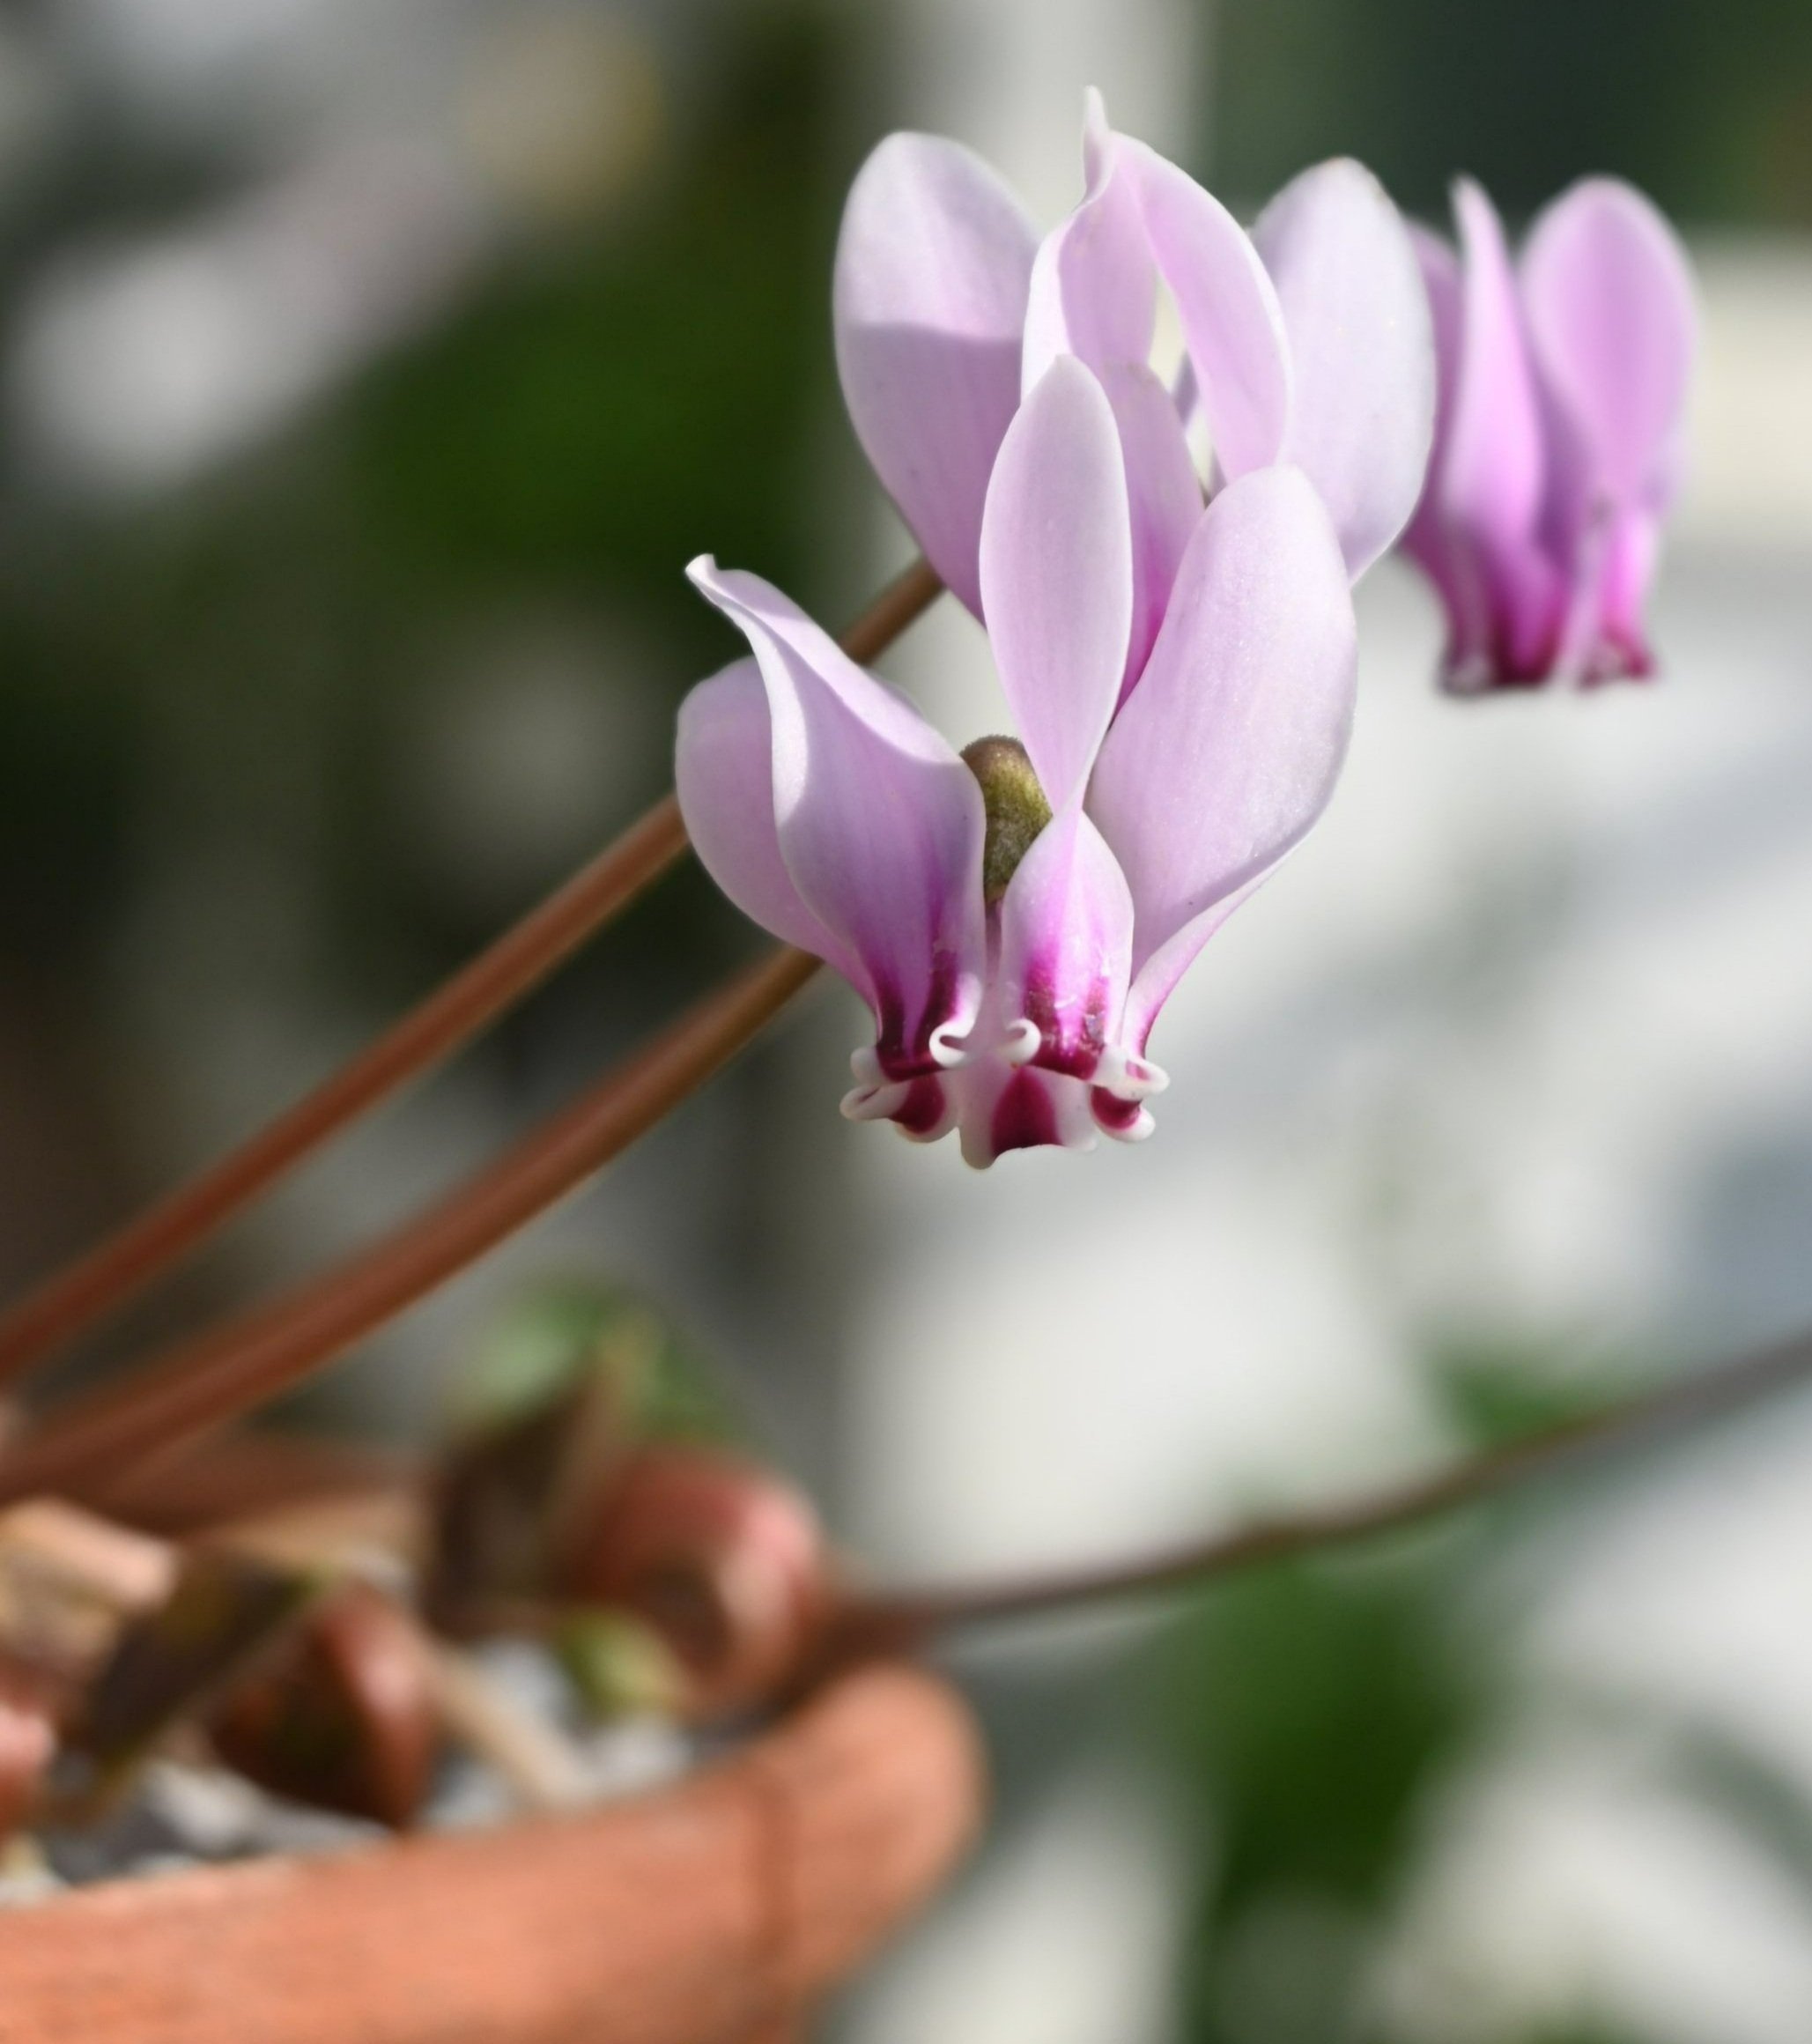  The petals of the cyclamen are often twisted, some more pronounced than others. This is just one characteristic breeders will select for. 